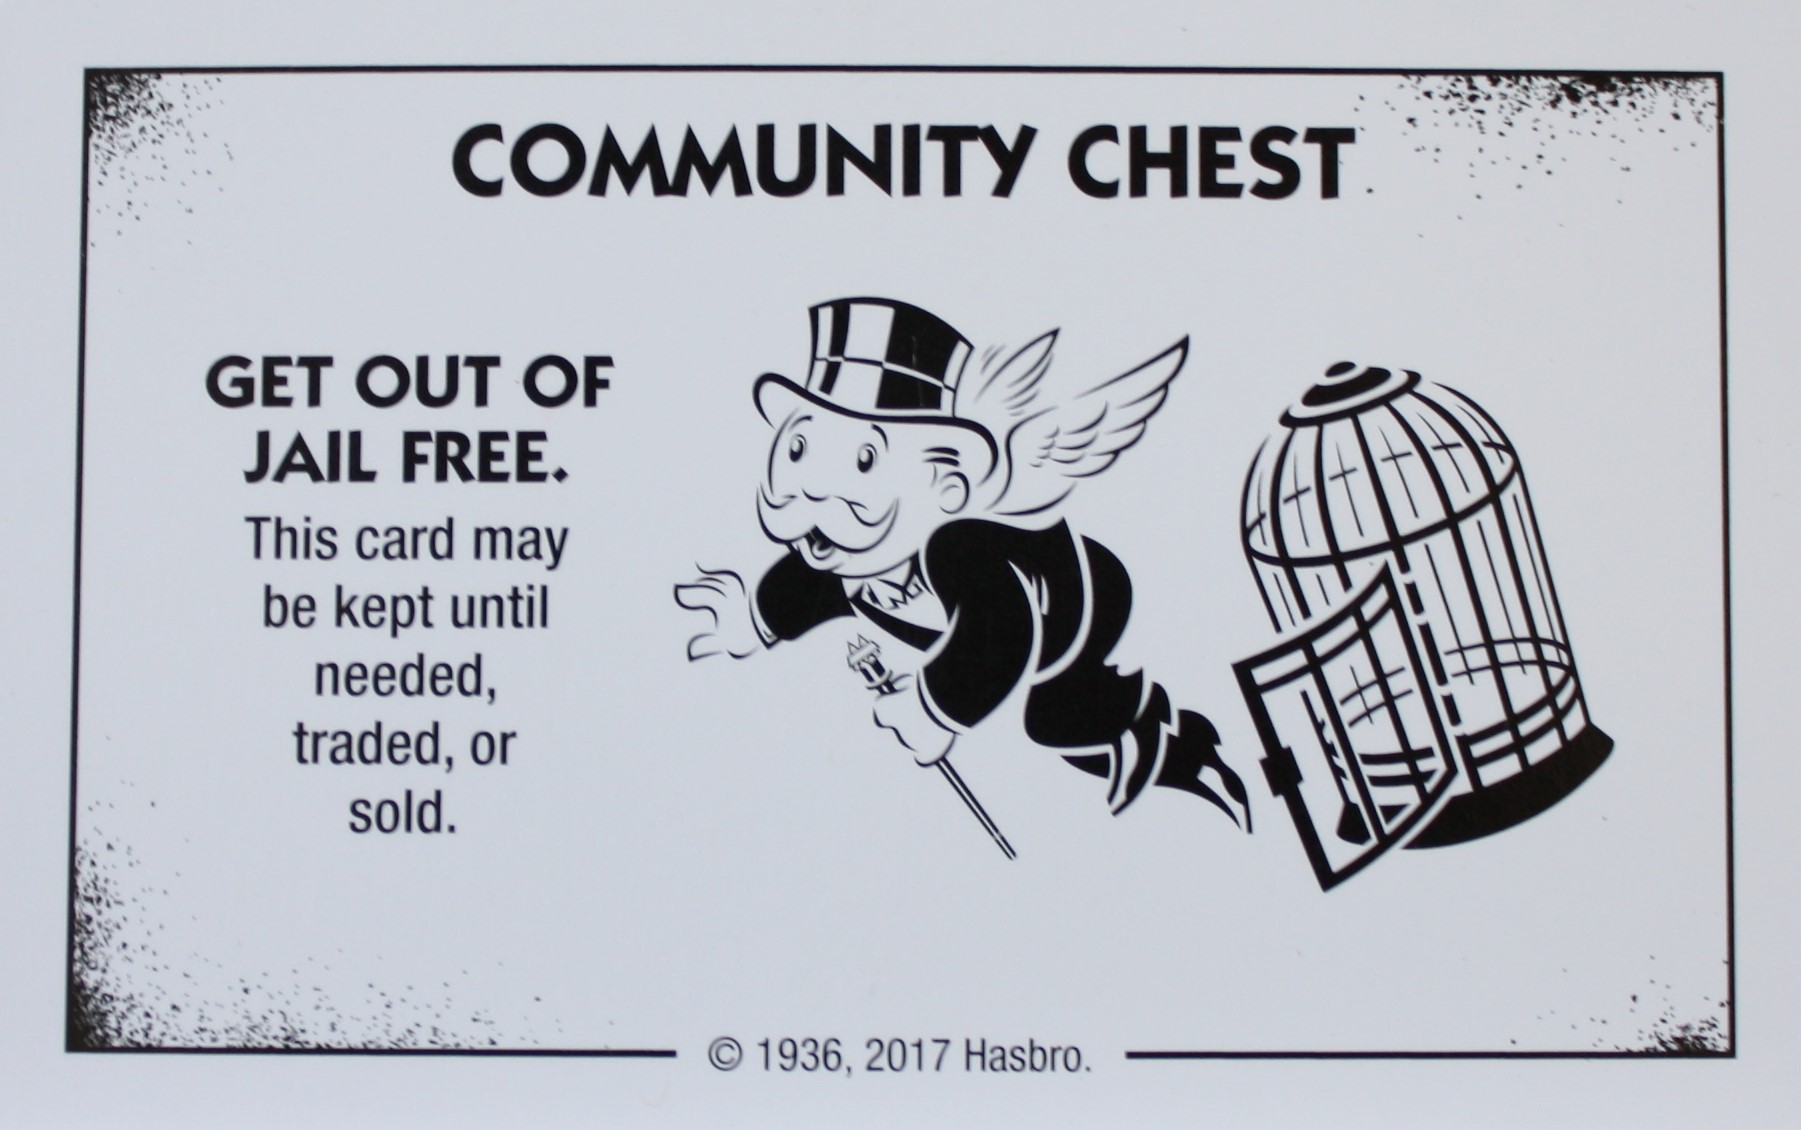 monopoly game cheaters edition